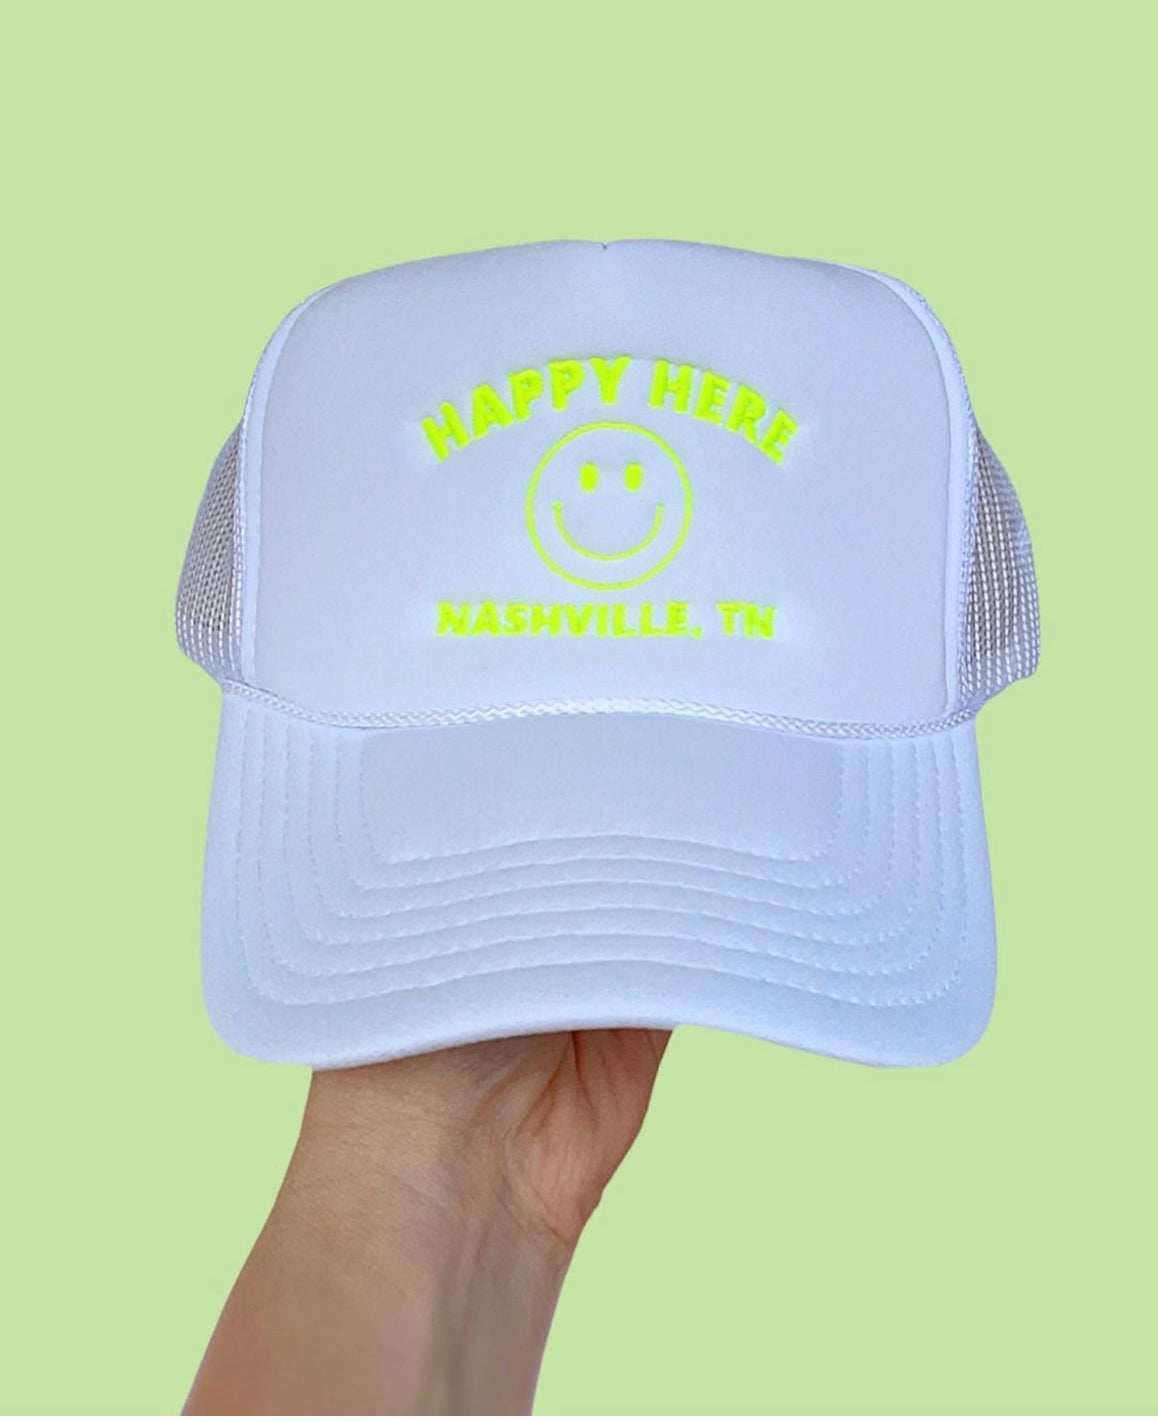 HAPPY HERE TENNESSEE Trucker Hat – The Happy Social Club